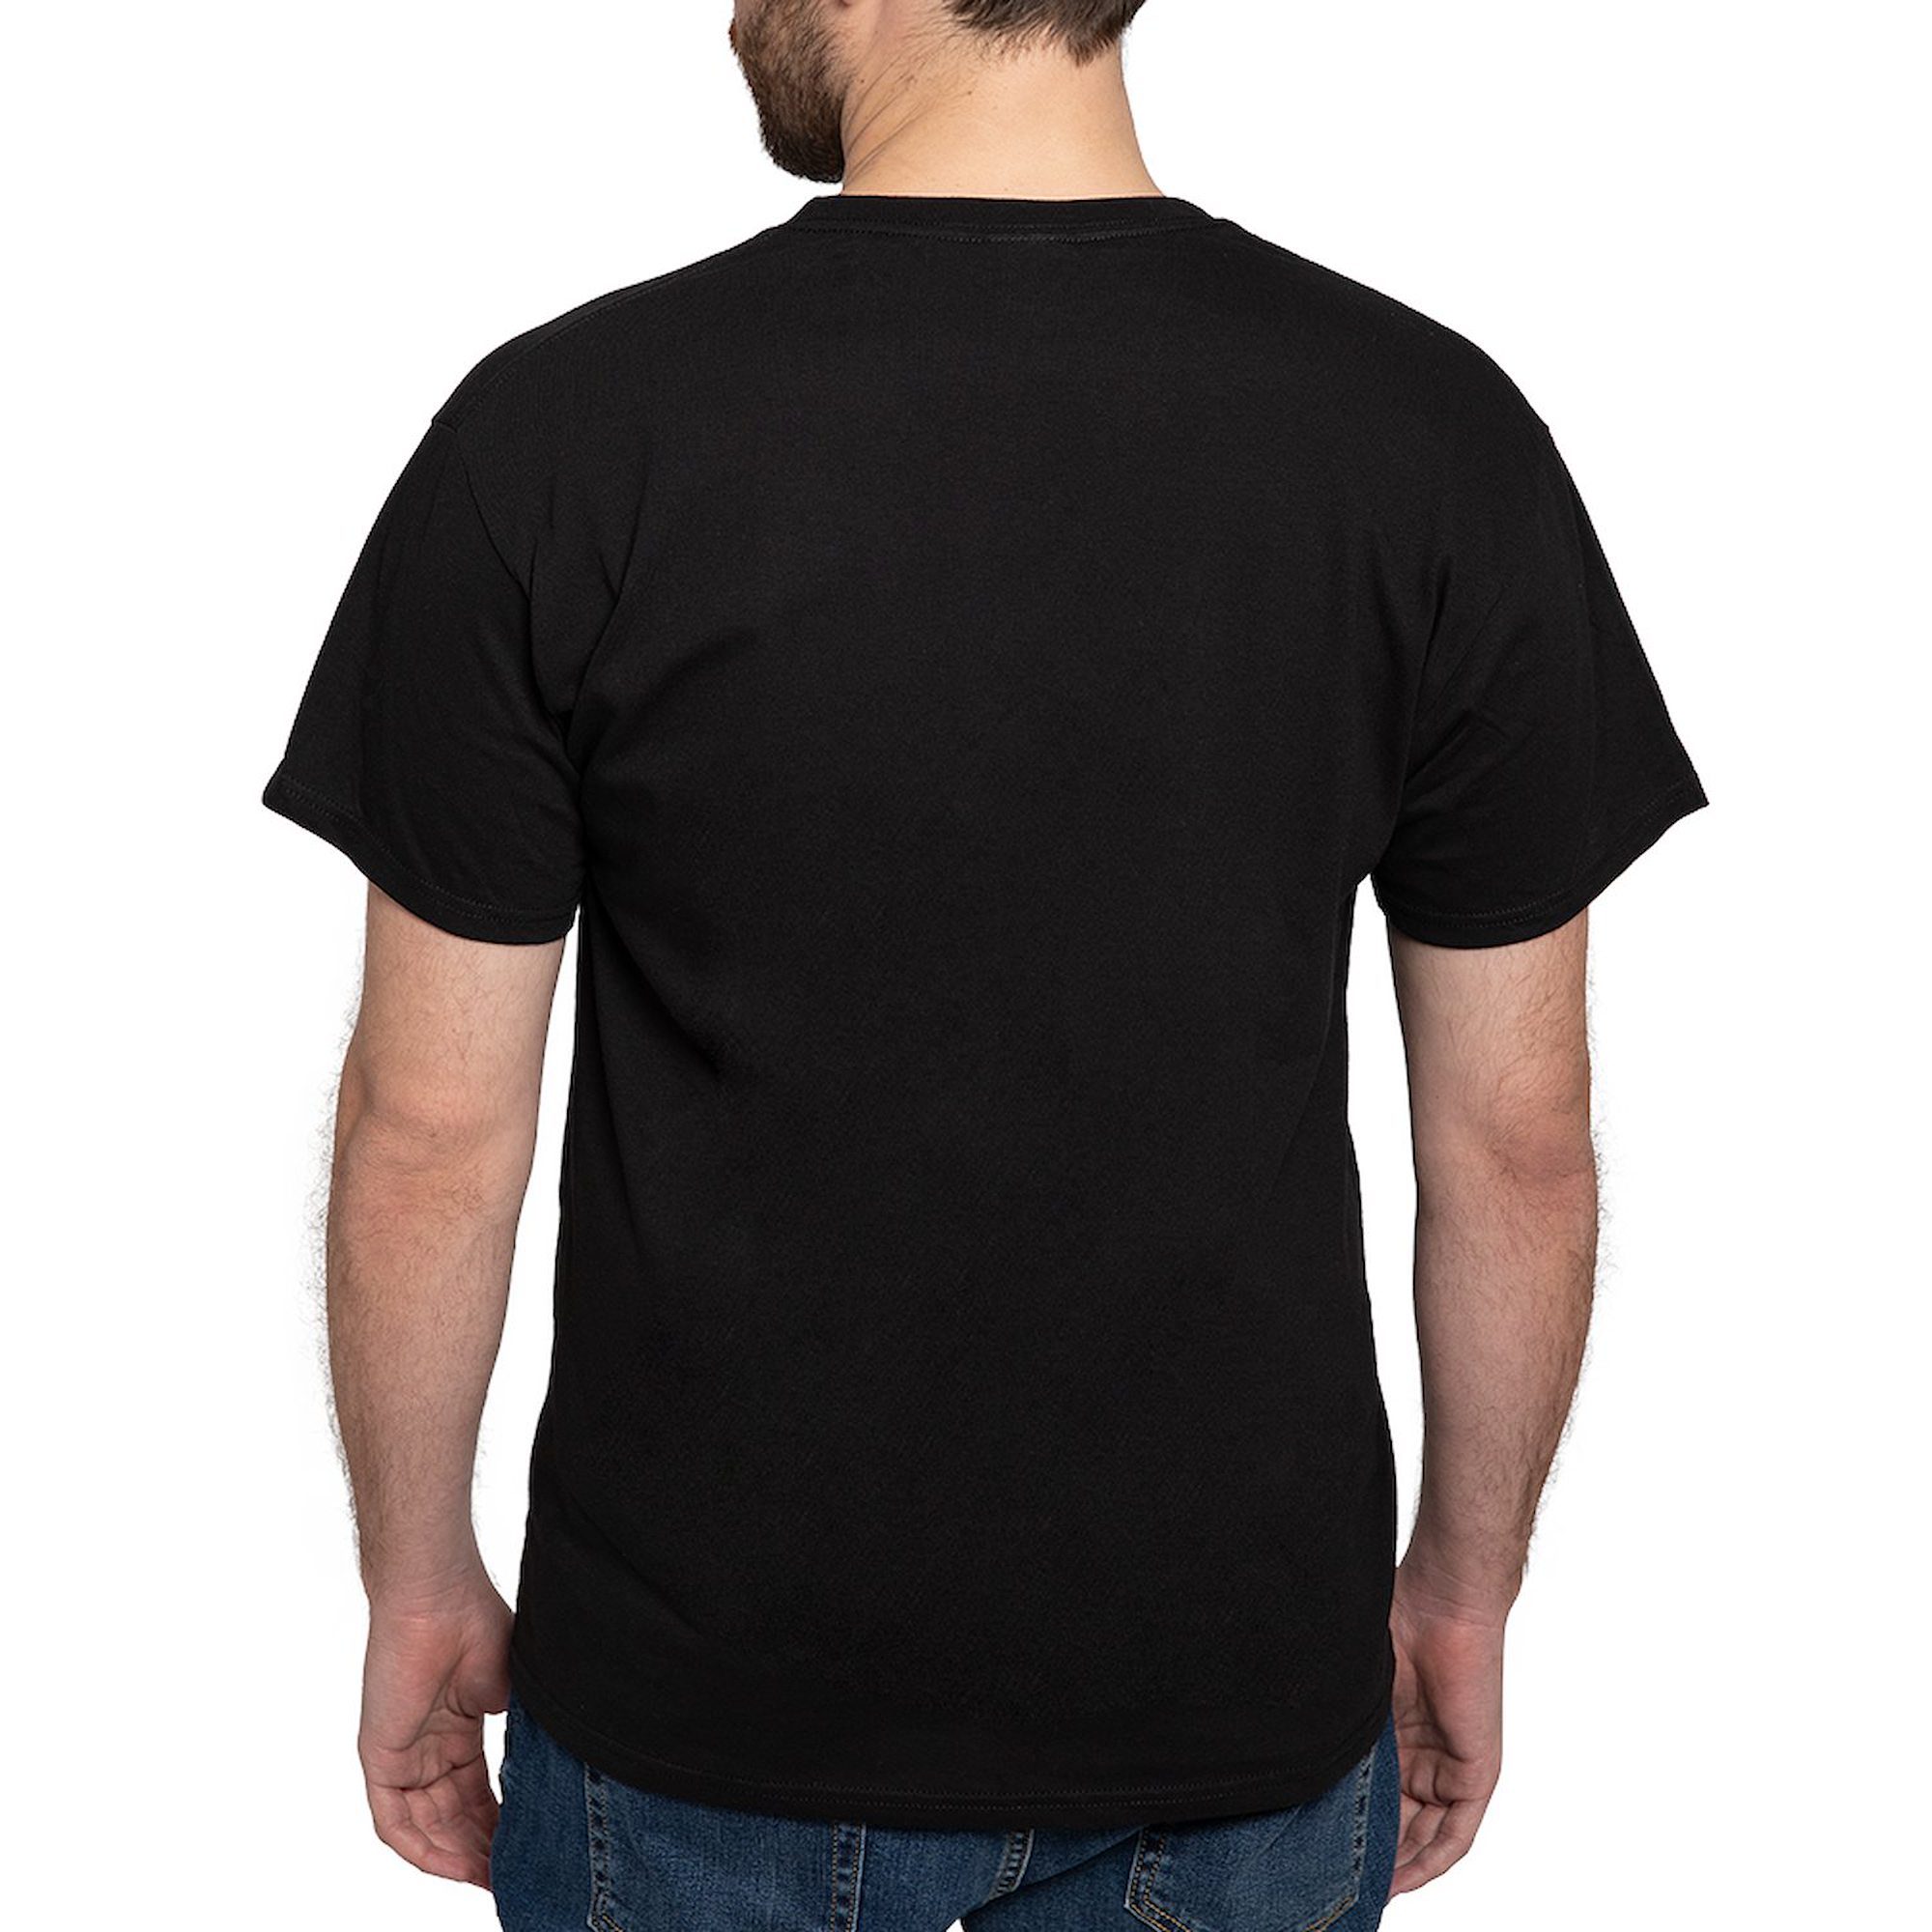 CafePress - Here I Am. What Are Your Othe Dark T Shirt - 100% Cotton T-Shirt - image 2 of 4